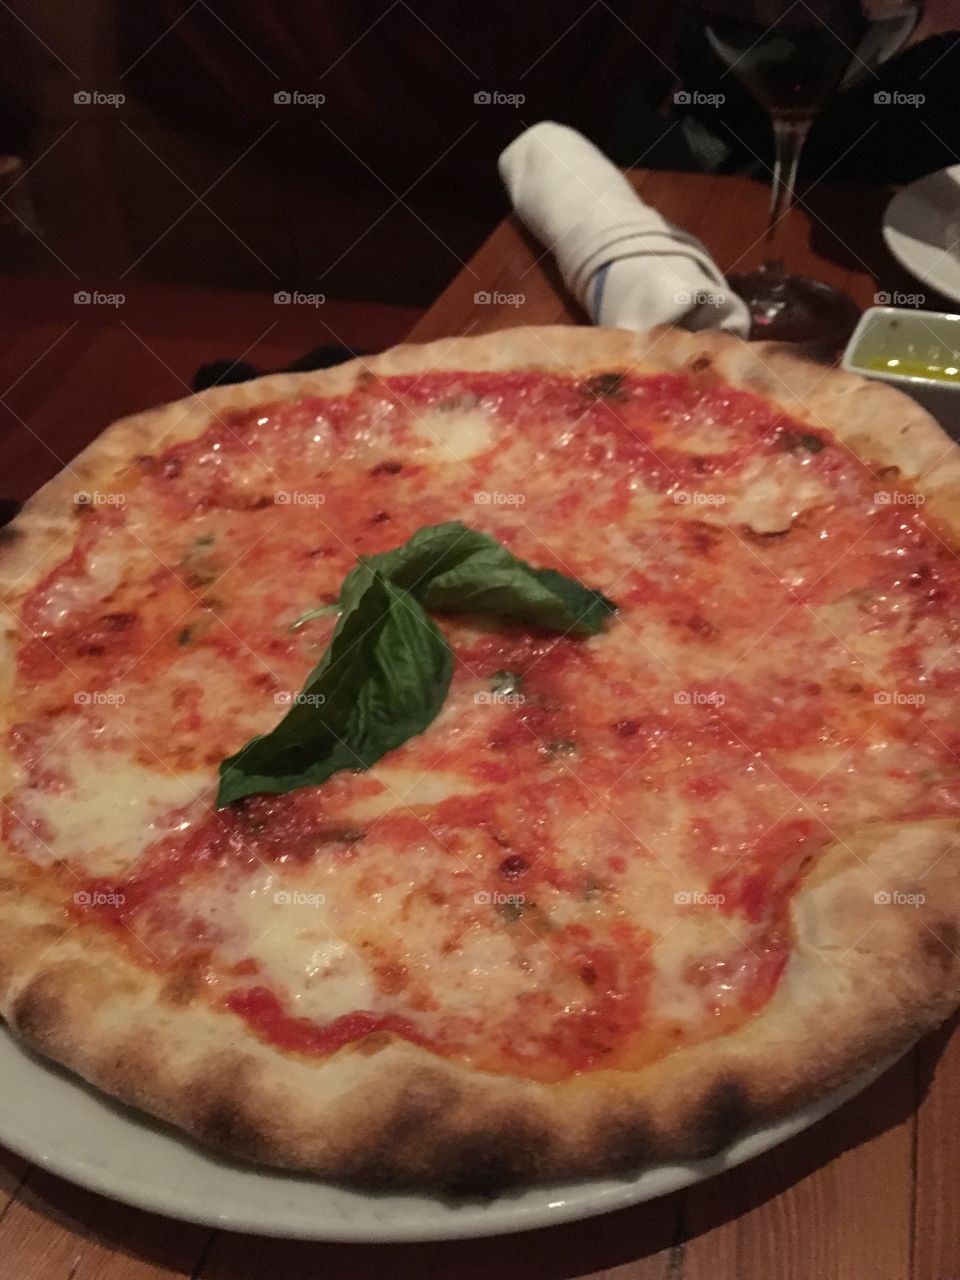 Brick oven tomato and cheese pizza topped with basil. Dinner at an Italian restaurant. 